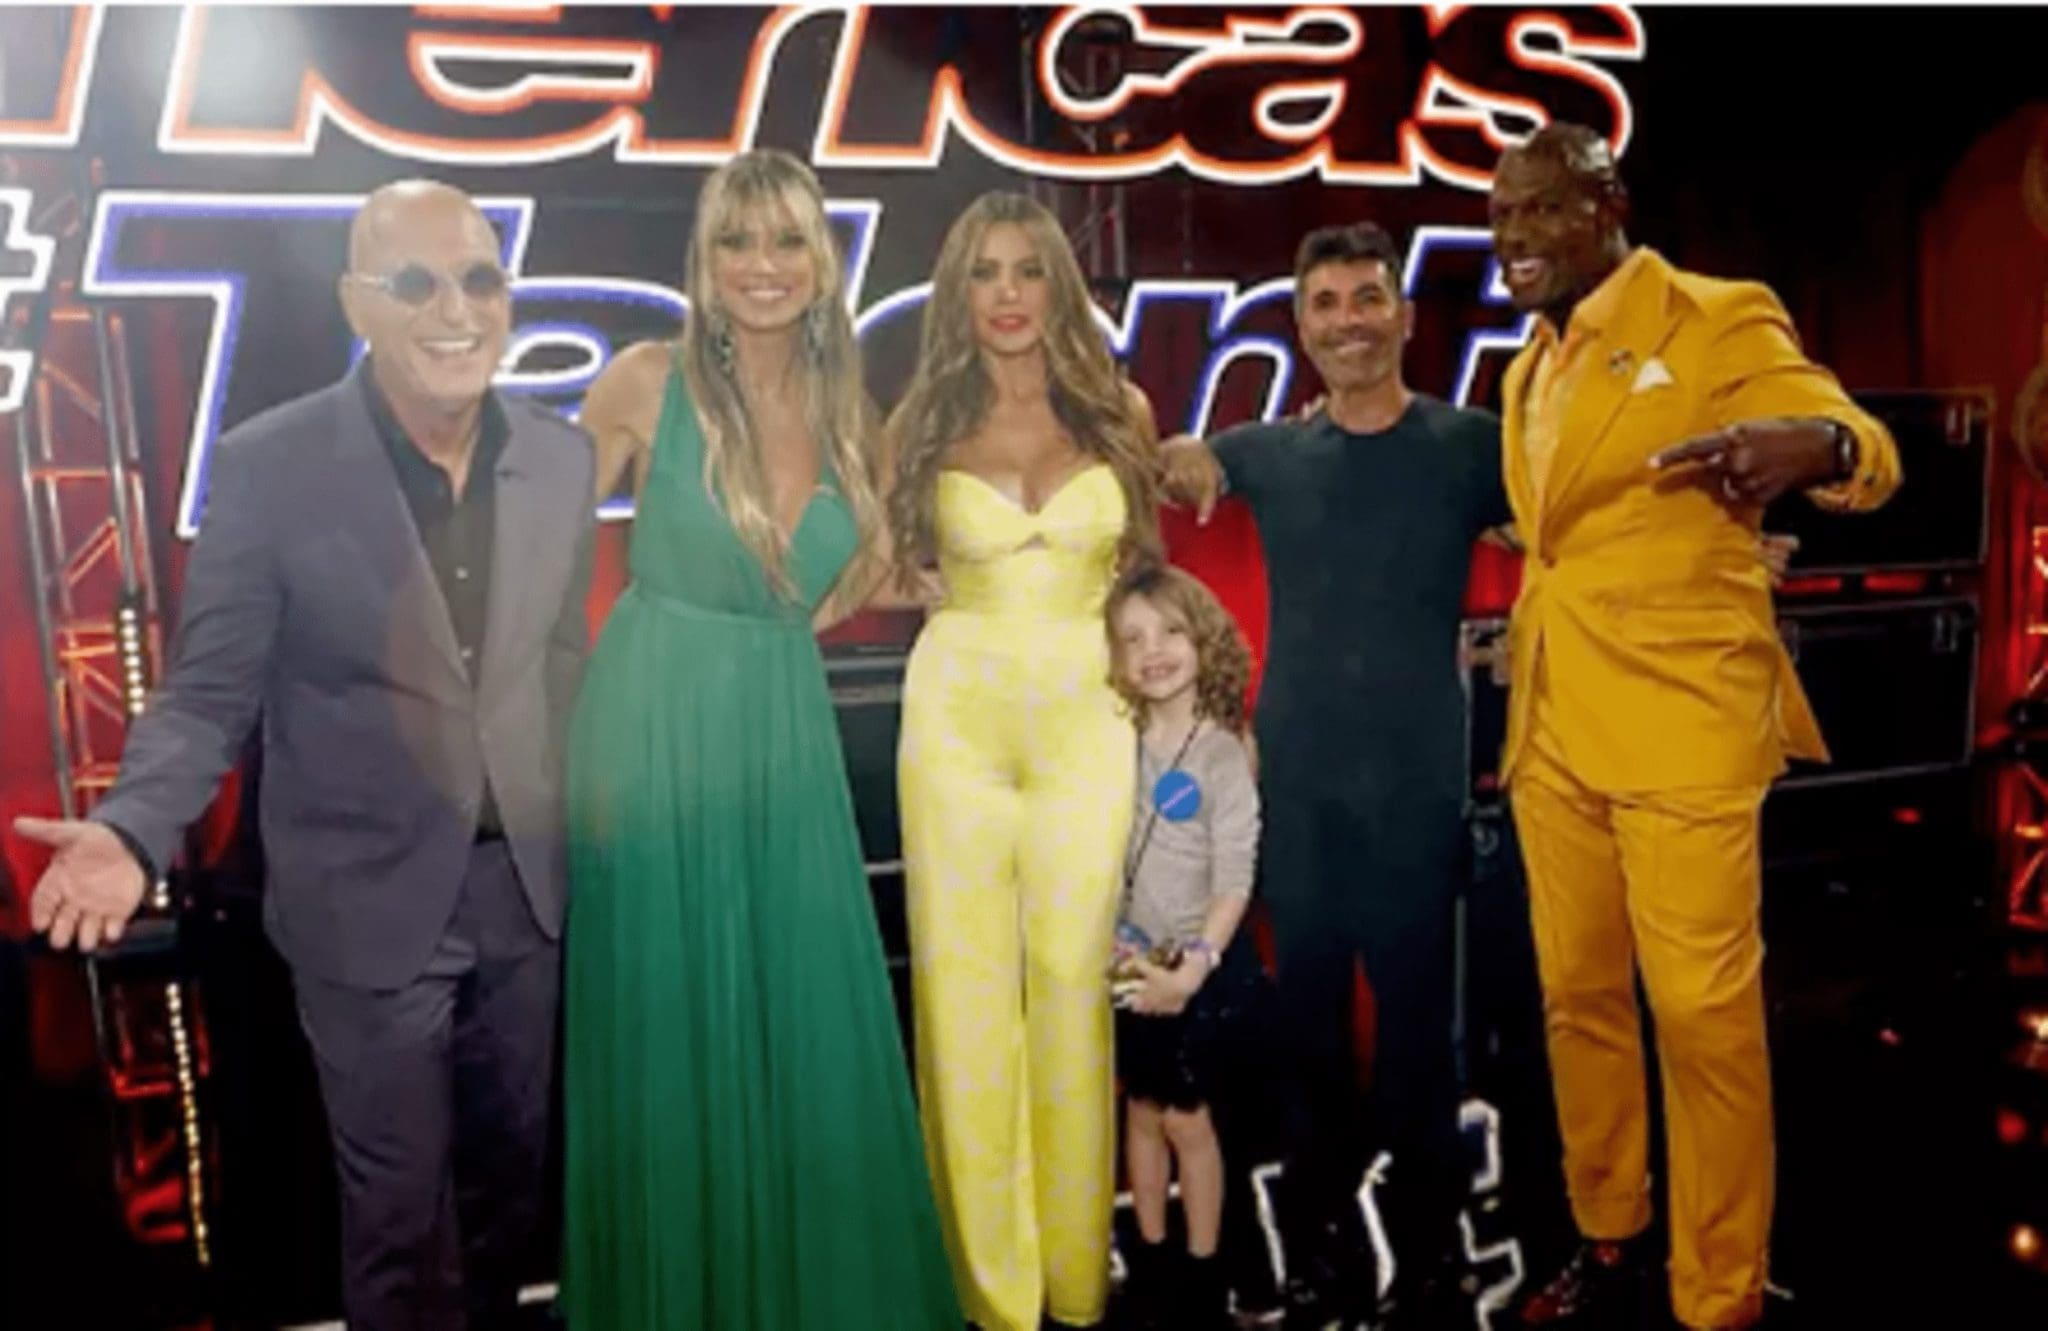 Judges And Presenters Of America's Got Talent Helped Fulfil An Incredible Make-A-Wish For A 6-Year-Old Girl